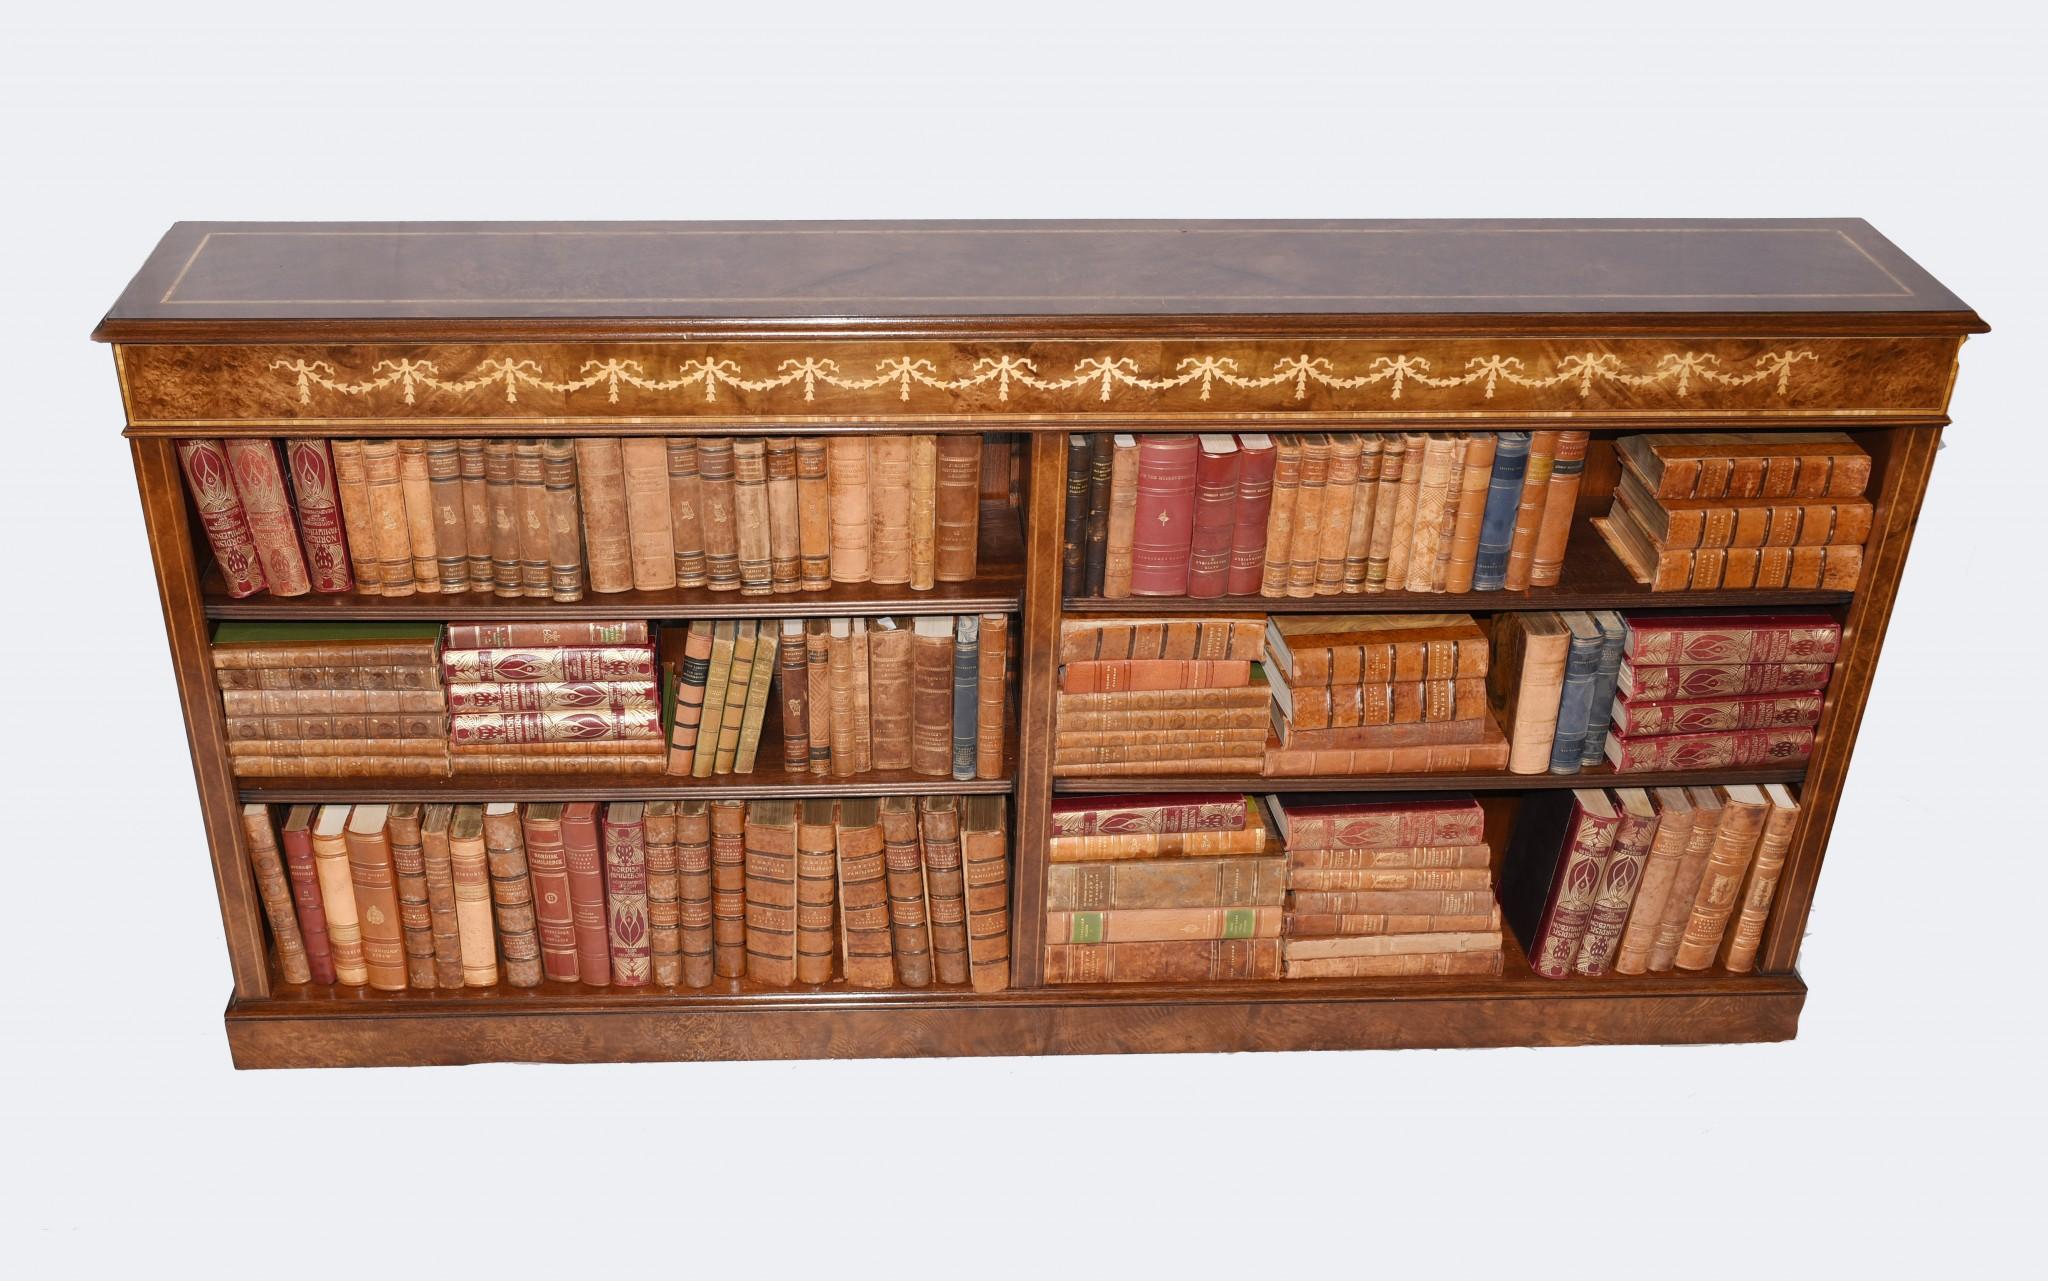 Gorgeous Regency style open front bookcase in walnut
Great thing about this piece is the size, plenty of width for all your books and tomes
Hand crafted from walnut with satinwood banding and inlay work with Sheraton sash motifs
Shelves are